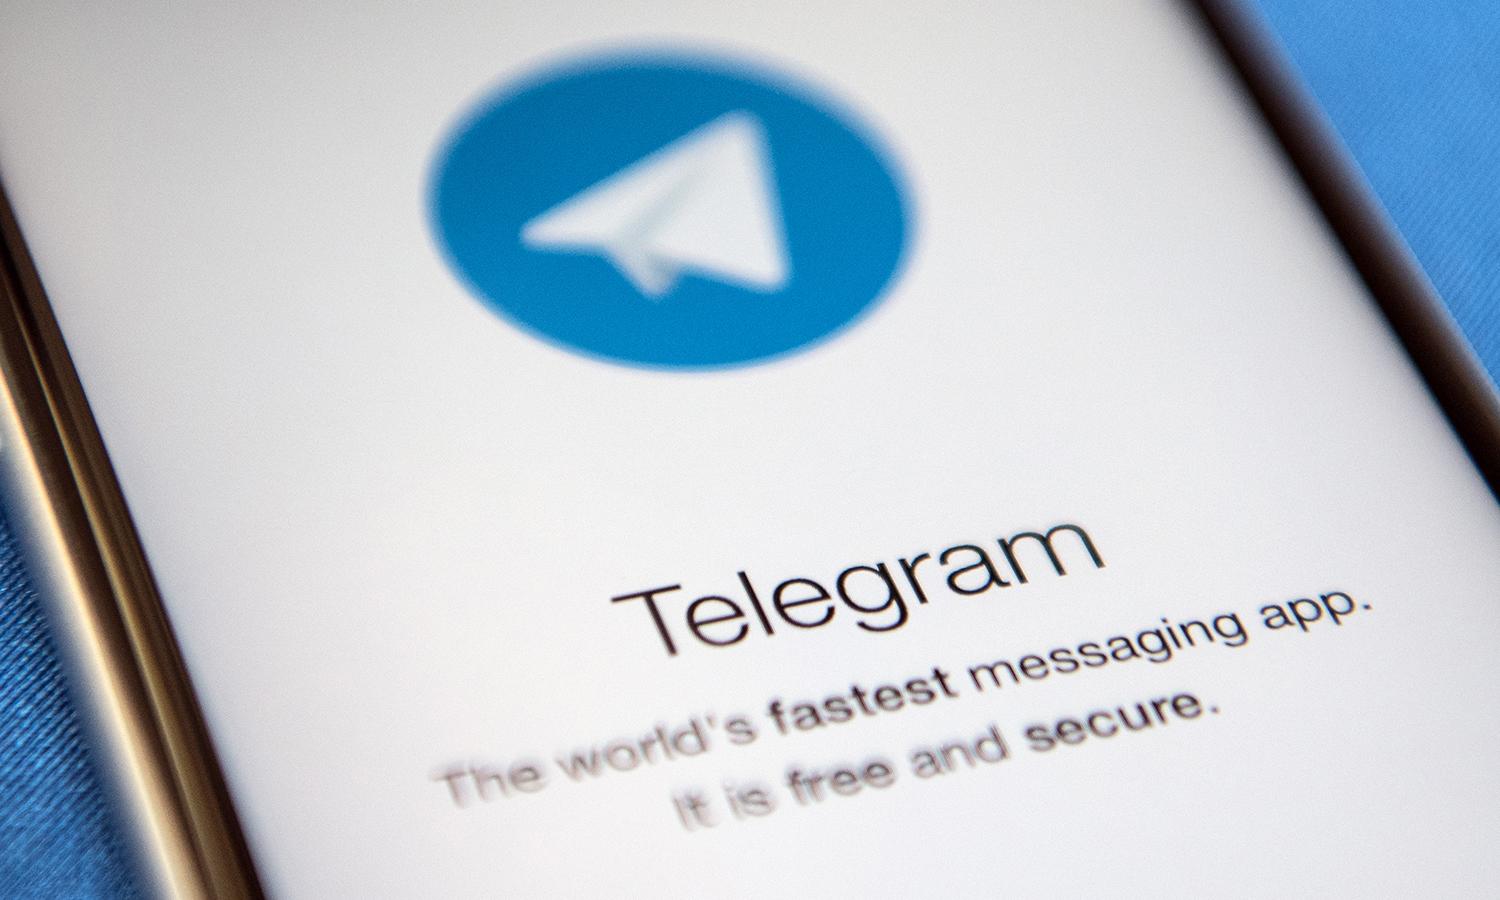 A close-up view of the Telegram messaging app is seen on a smartphone screen.